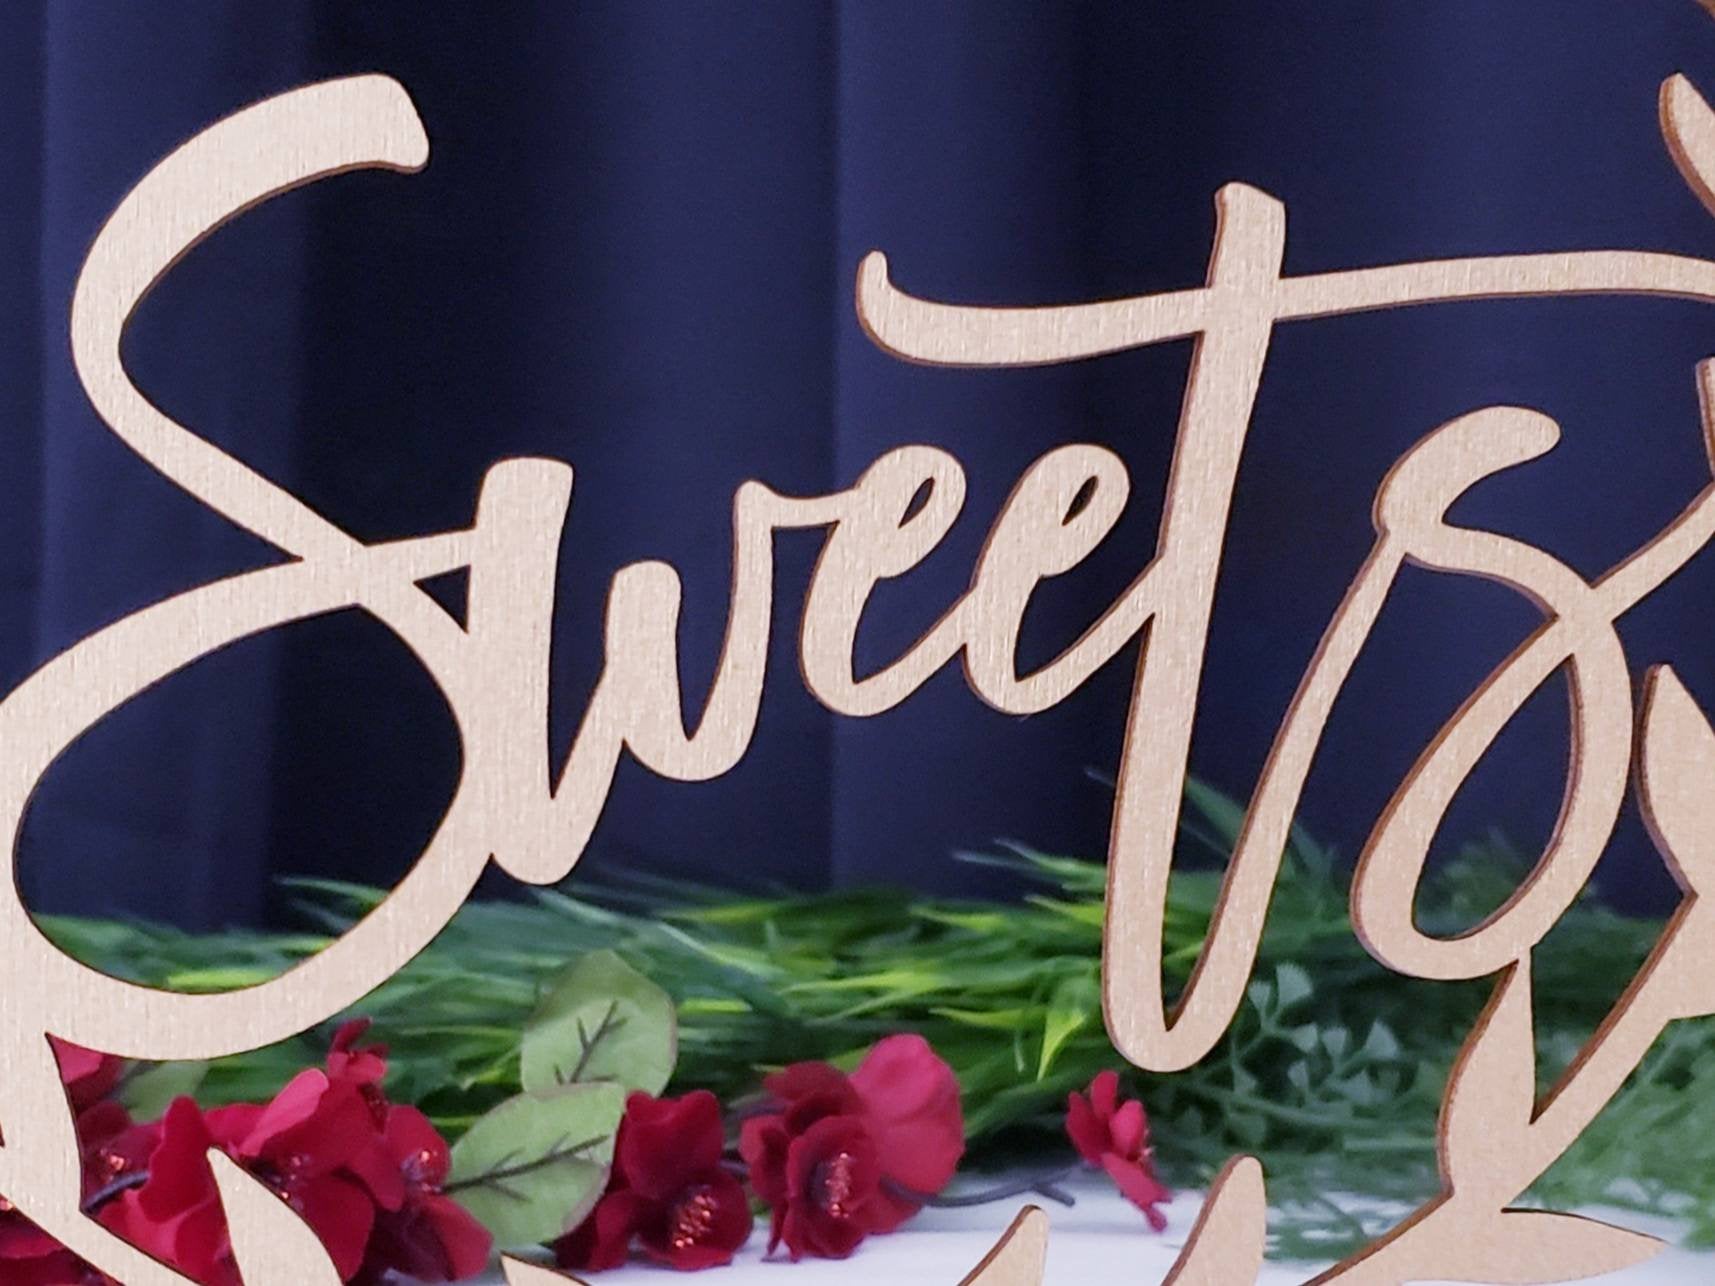 Sweets Table Sign